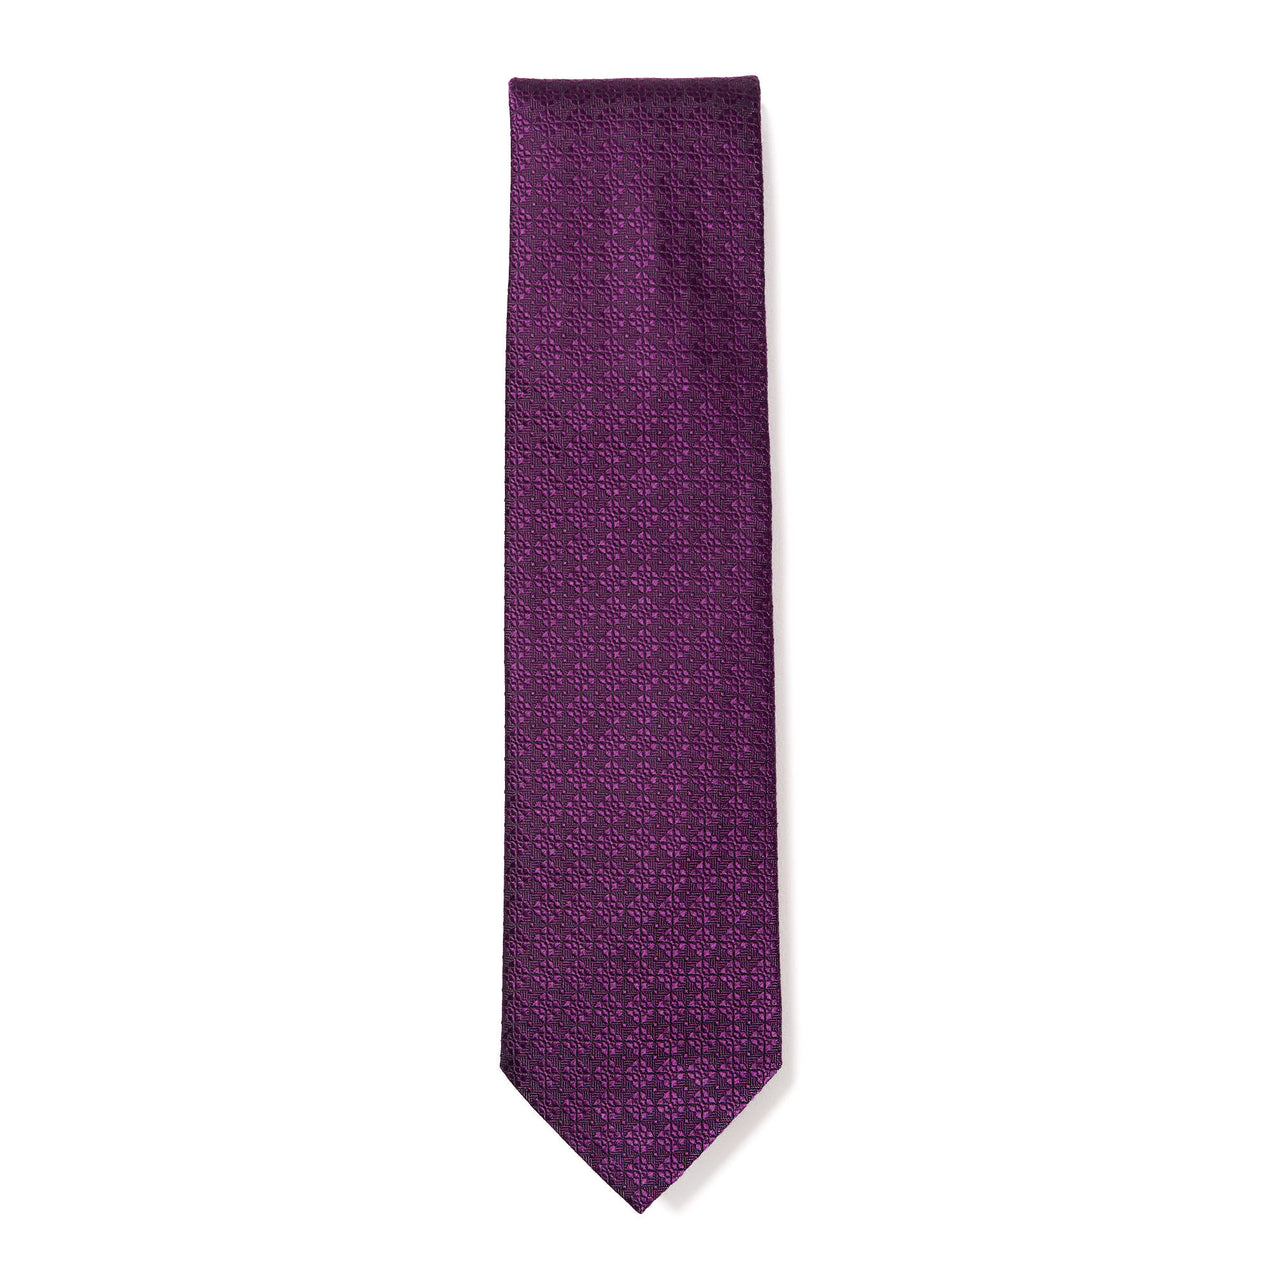 HENRY SARTORIAL X CANTINI Woven Textured Tie BURGUNDY